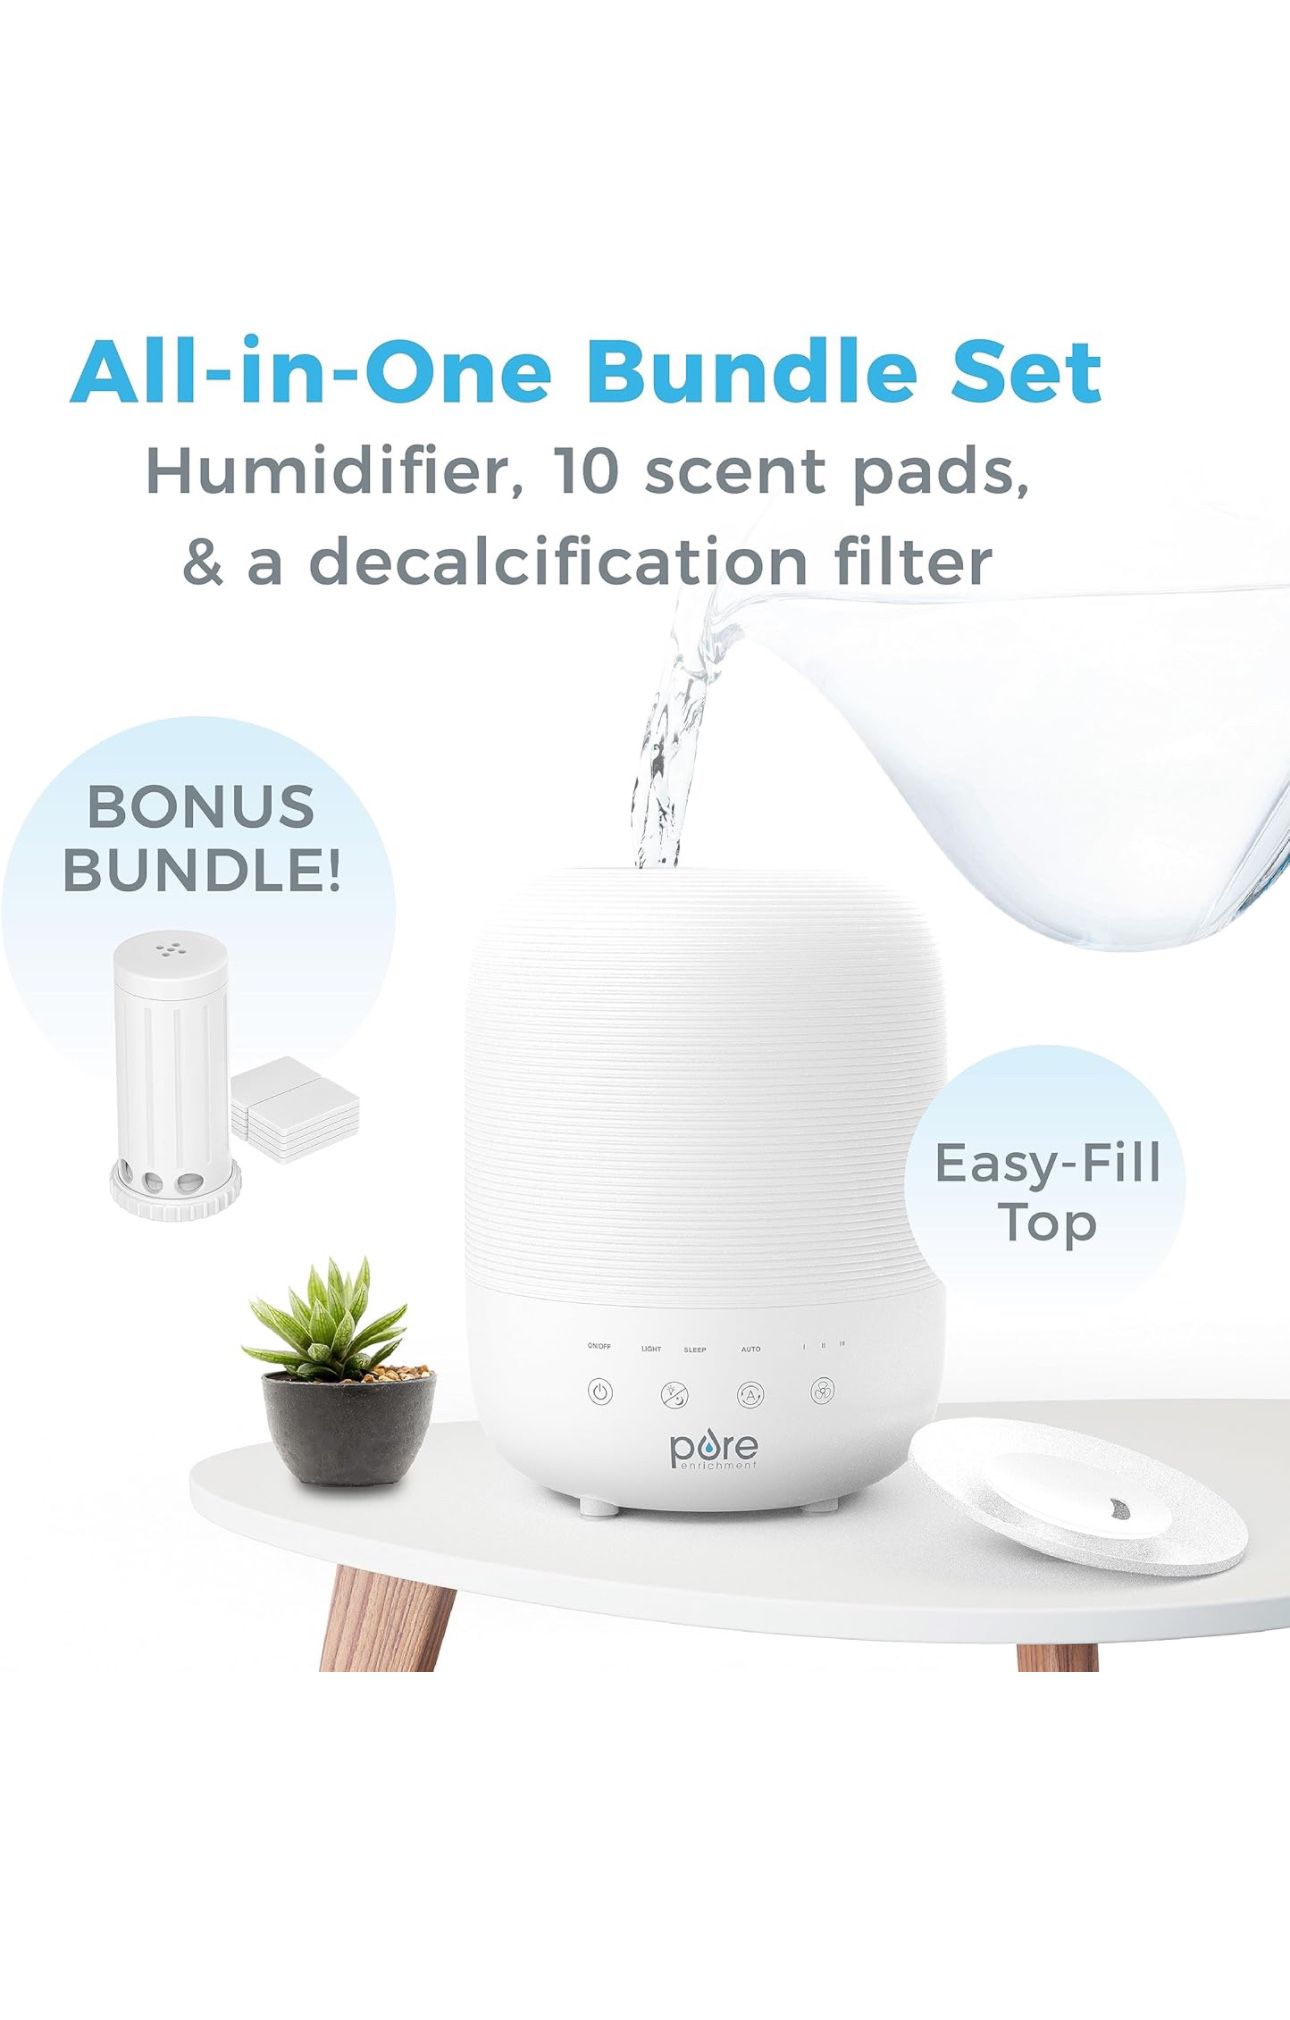 Pure Enrichment® HUME™ Sense Top-Fill Humidifier Bundle - 1 Ultrasonic Cool Mist Humidifier, 1 Decalcification Filter & 10 Scent Pads for Large Rooms 